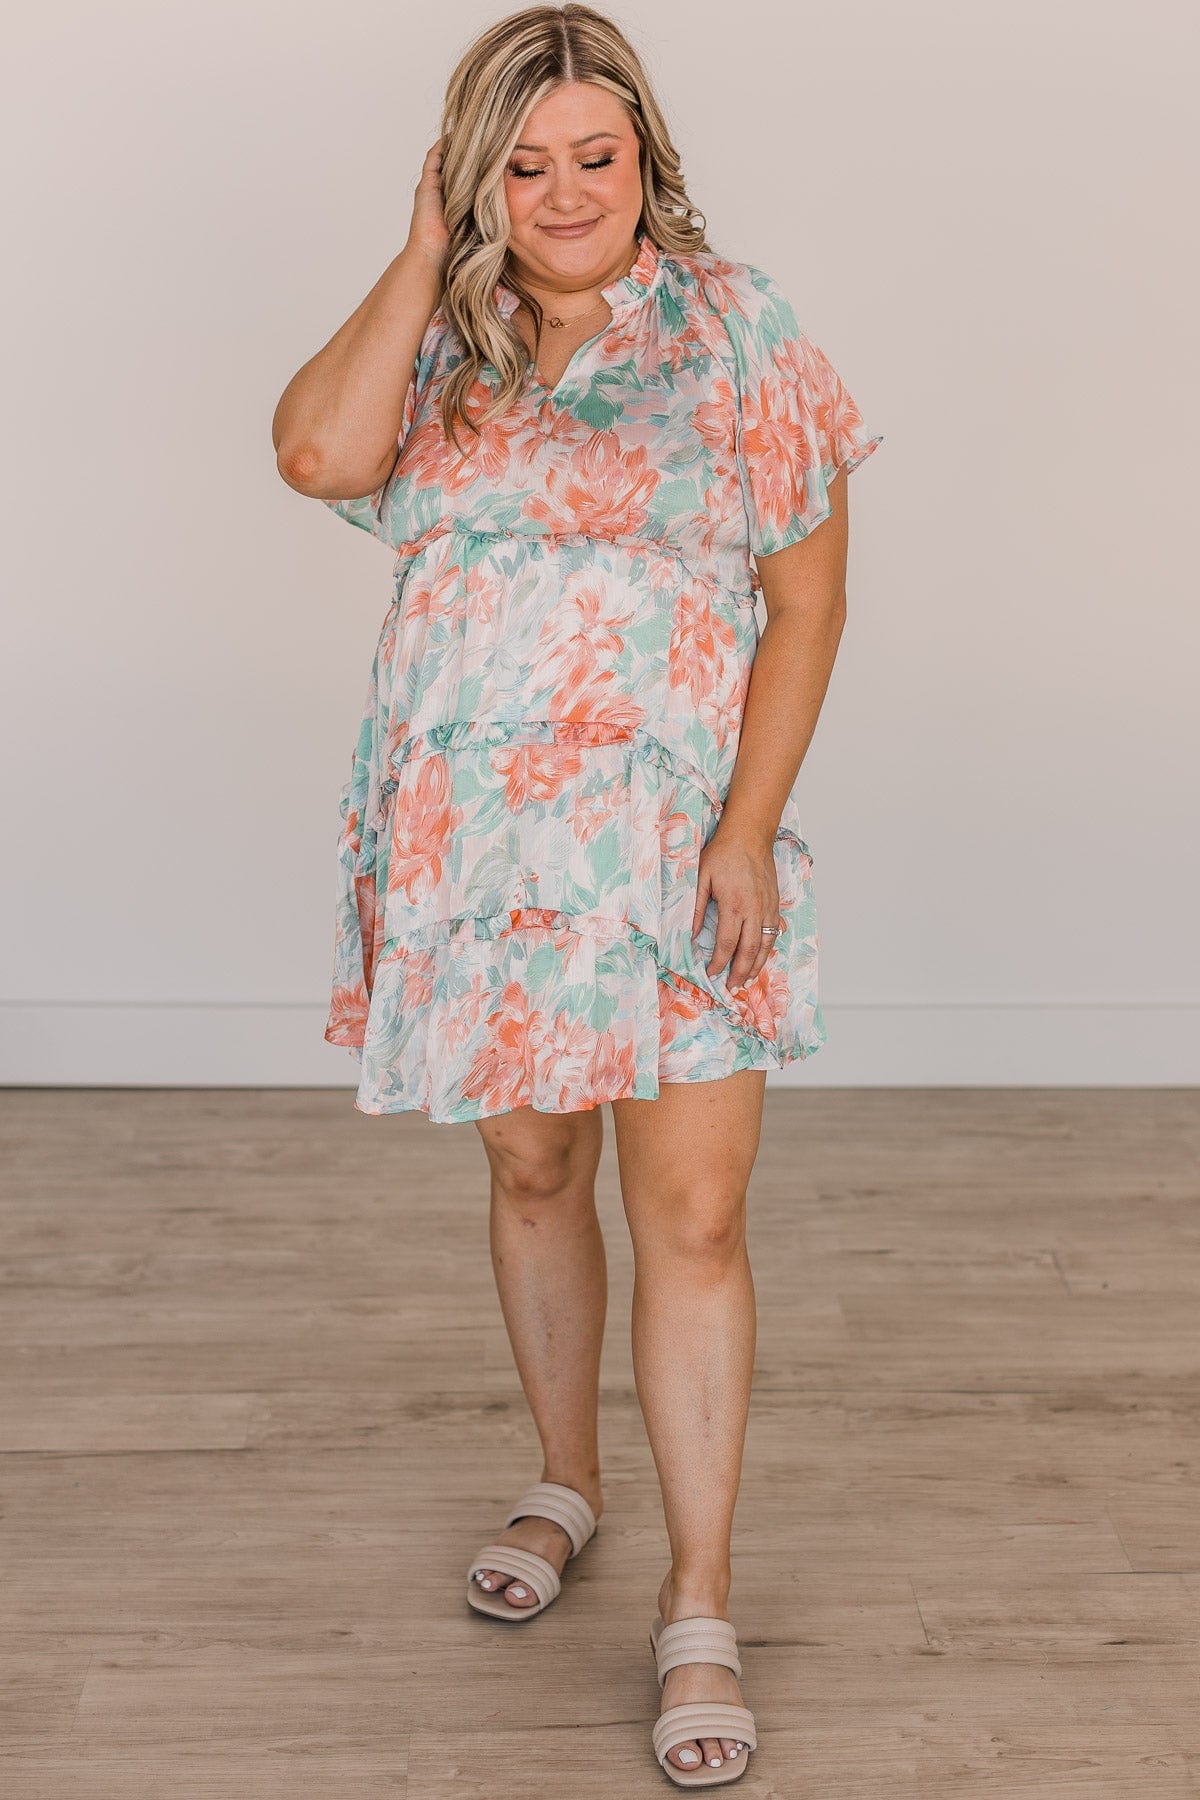 Cherish The Thought Floral Dress- Peach & Turquoise